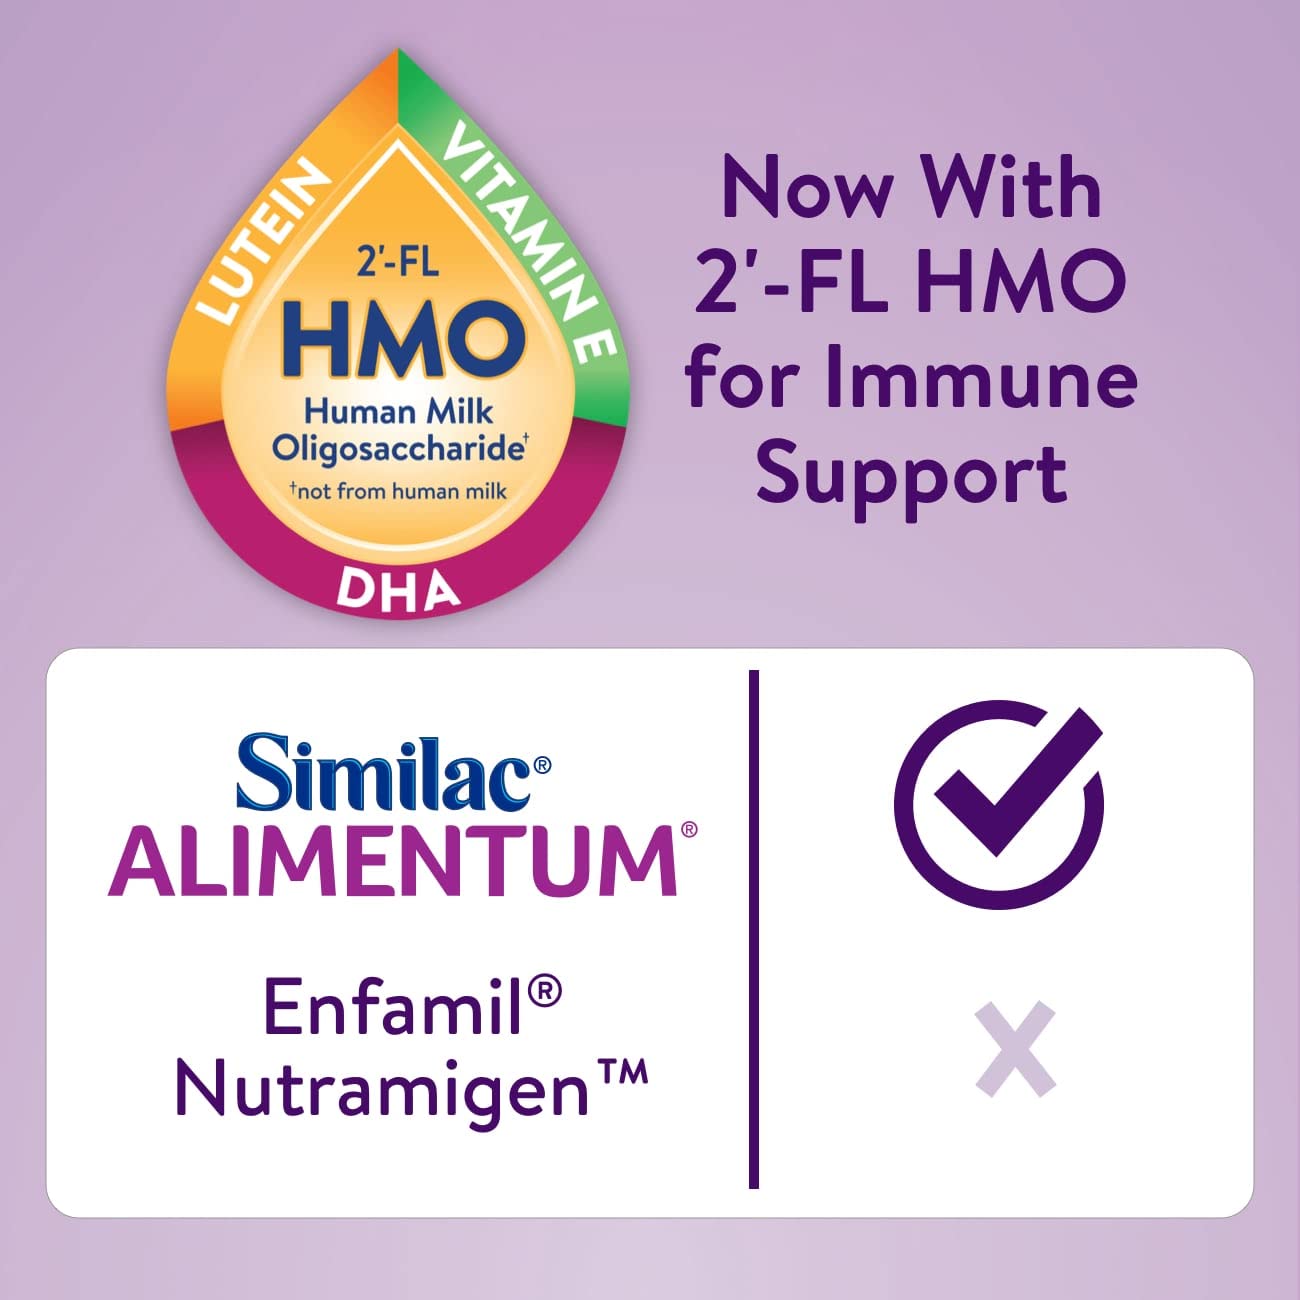 Similac Alimentum with 2’-FL HMO Hypoallergenic Infant Formula, for Food Allergies and Colic, Suitable for Lactose Sensitivity, Ready-to-Feed Baby Formula, 32-fl-oz ,Pack of 6